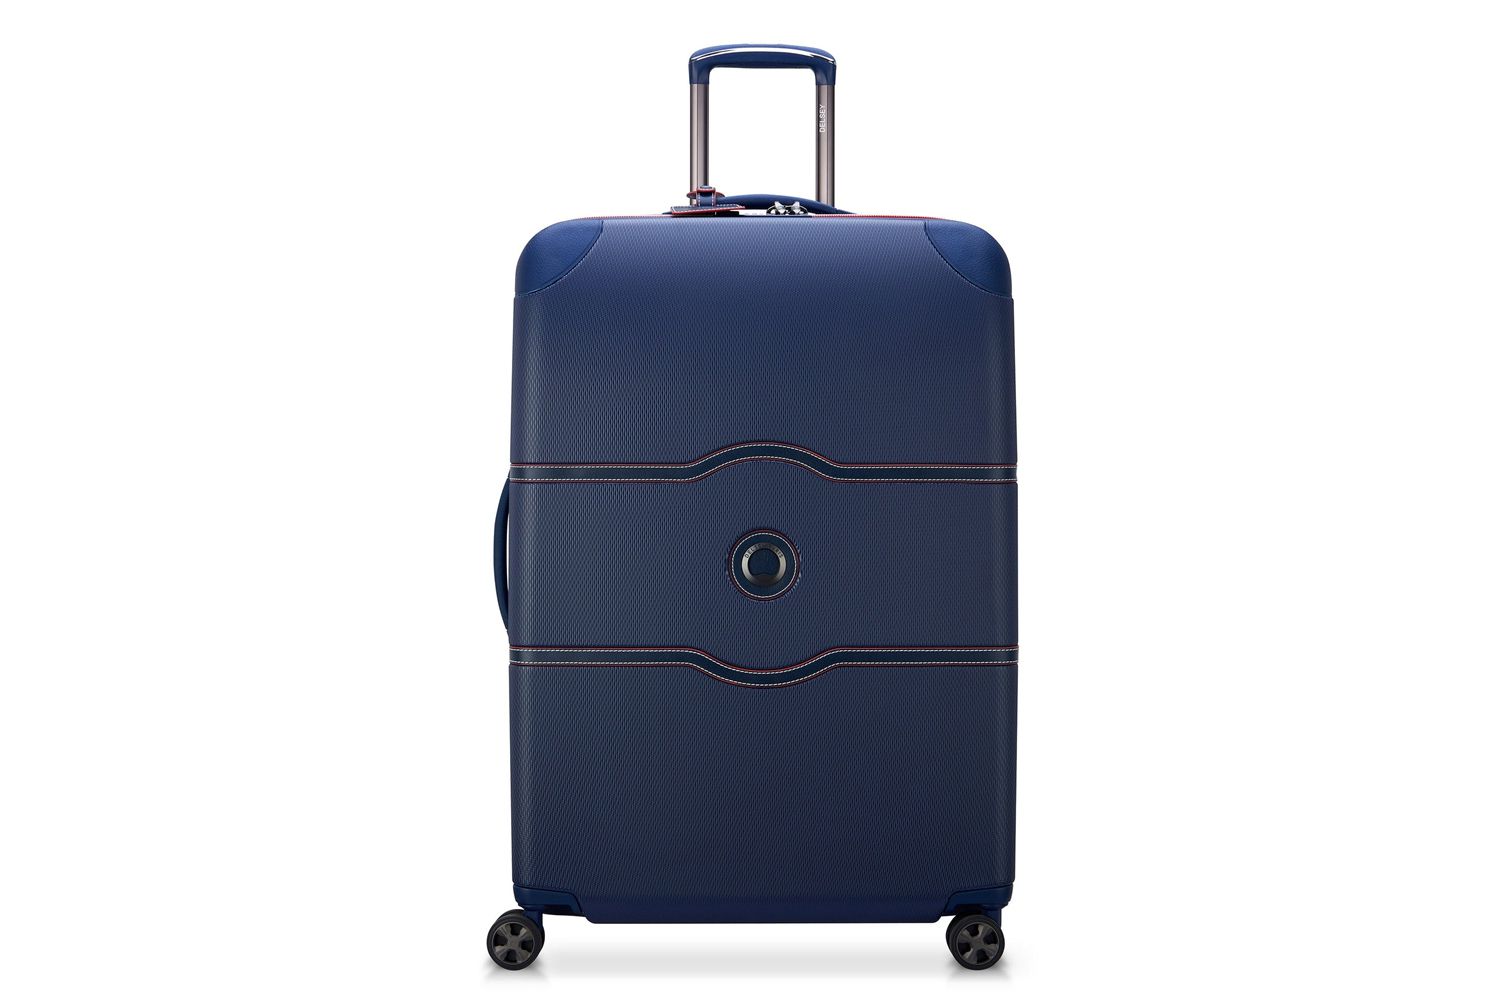 Delsey Chatelet Air 2.0 Checked, 28-inch